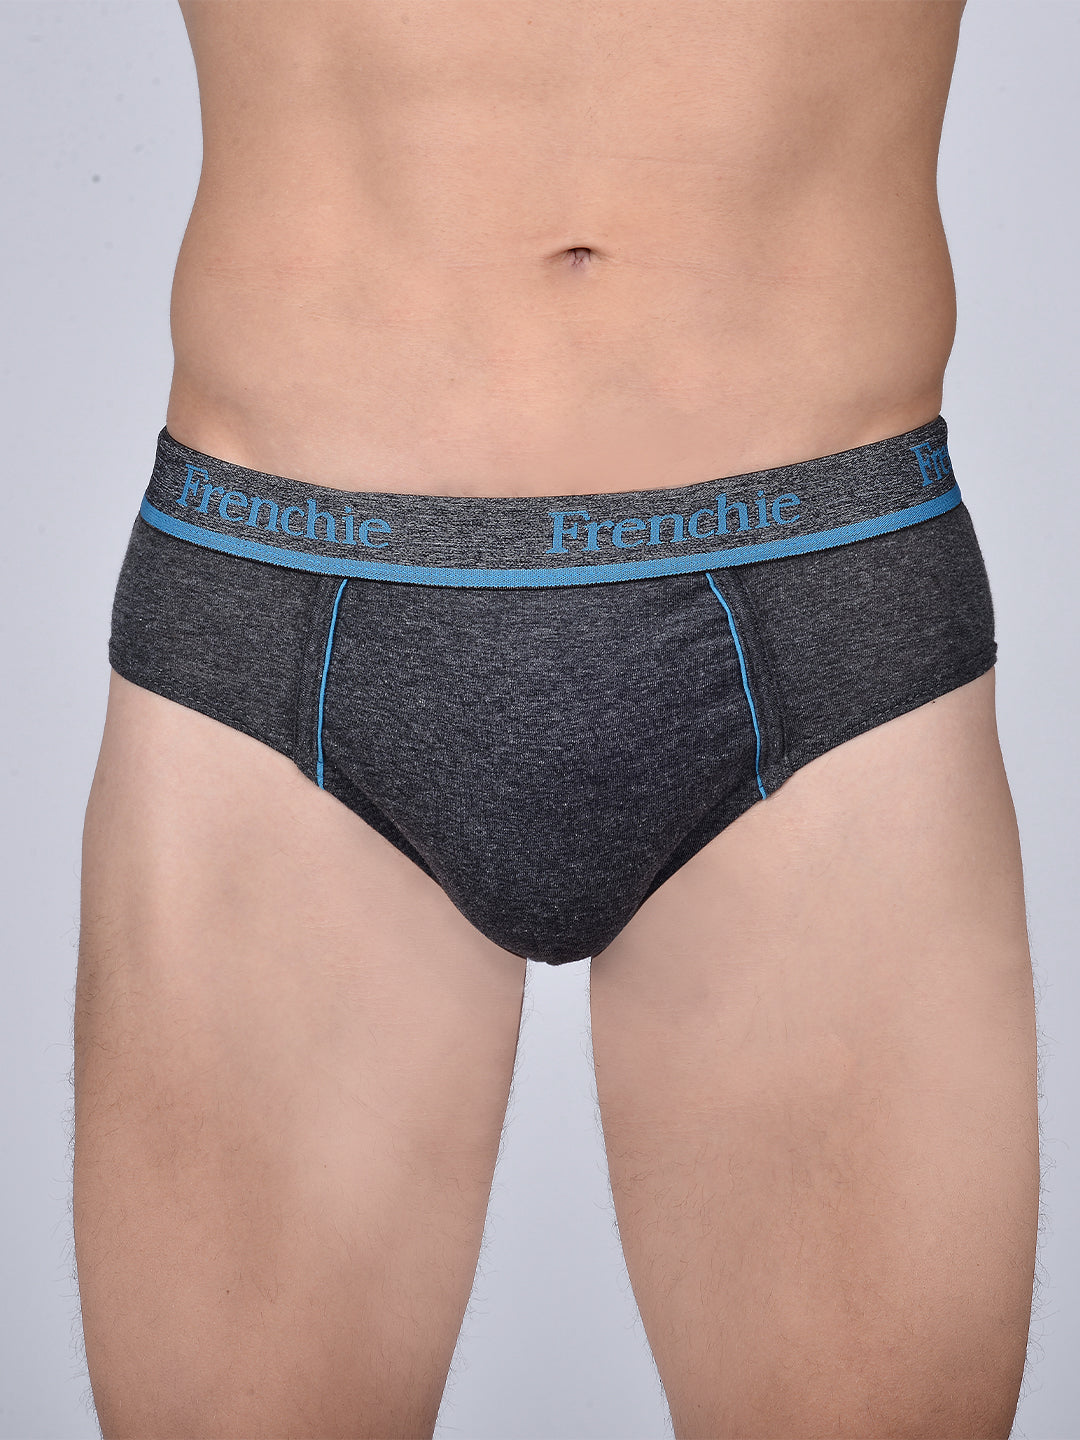 Buy VIP Frenchie Pro Men's Underwear (Size-110 cm, Assorted Colour) - Pack  of 5 at